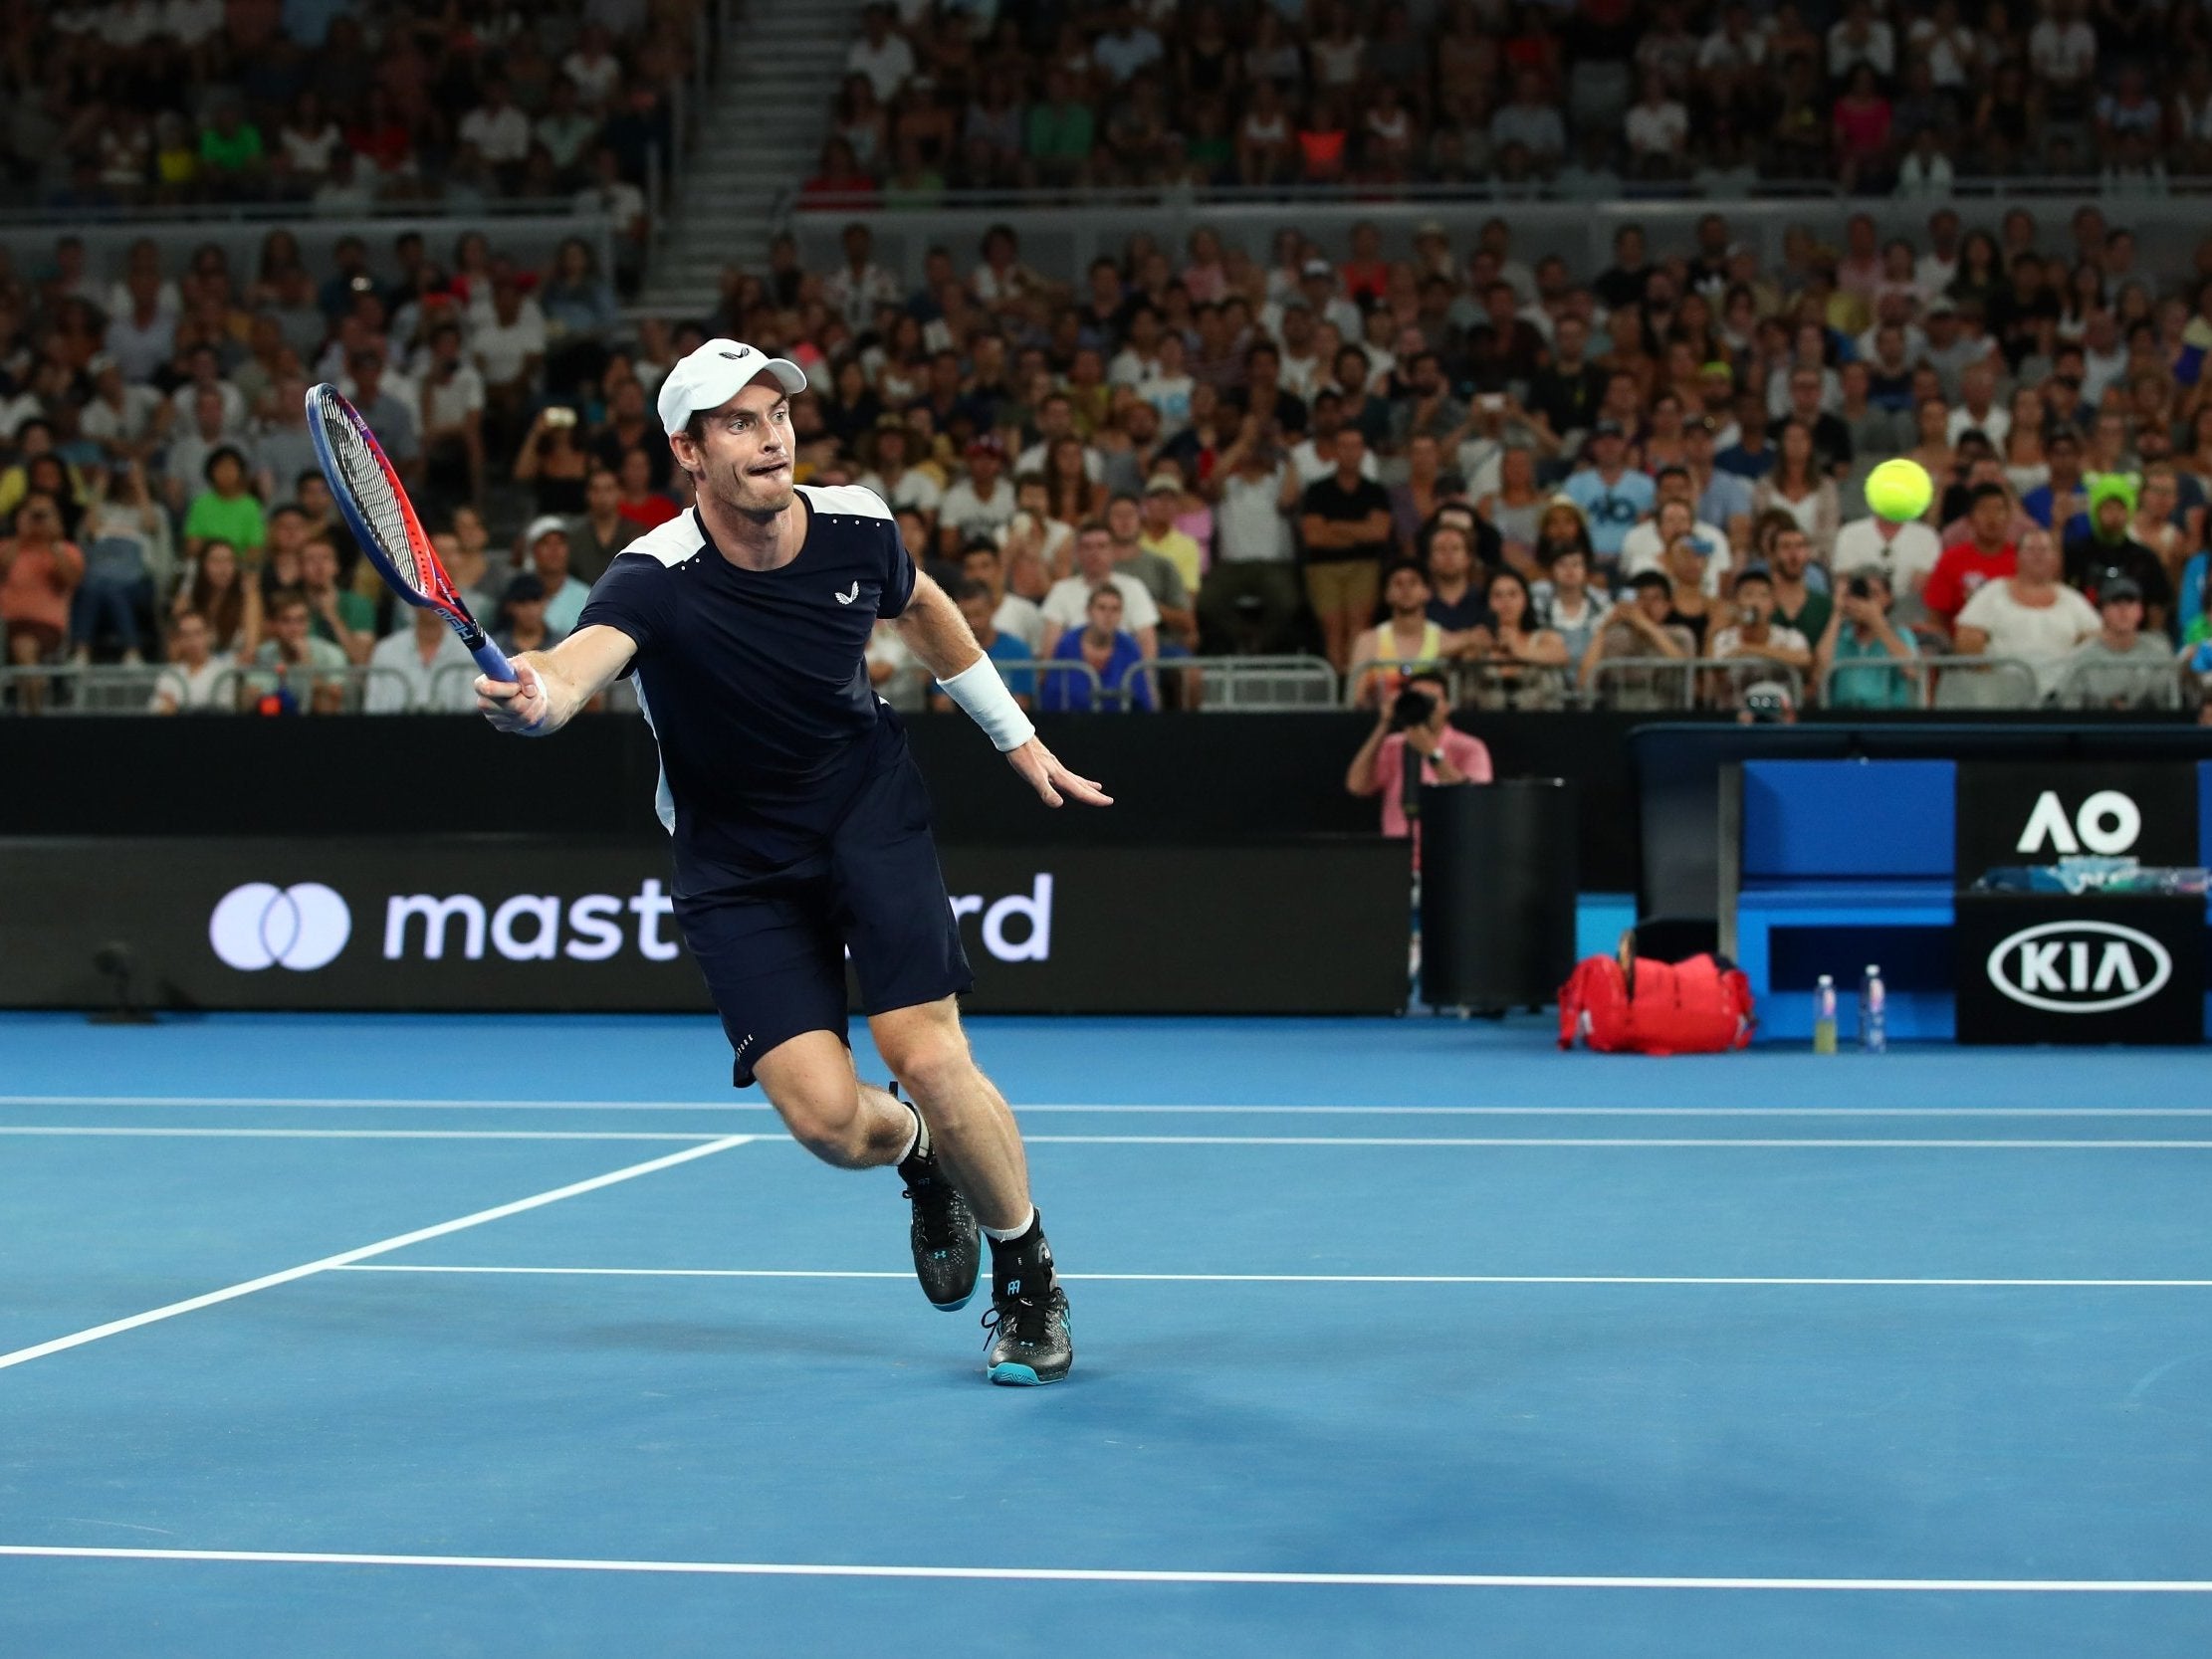 Murray in action during the second set against Bautista Agut